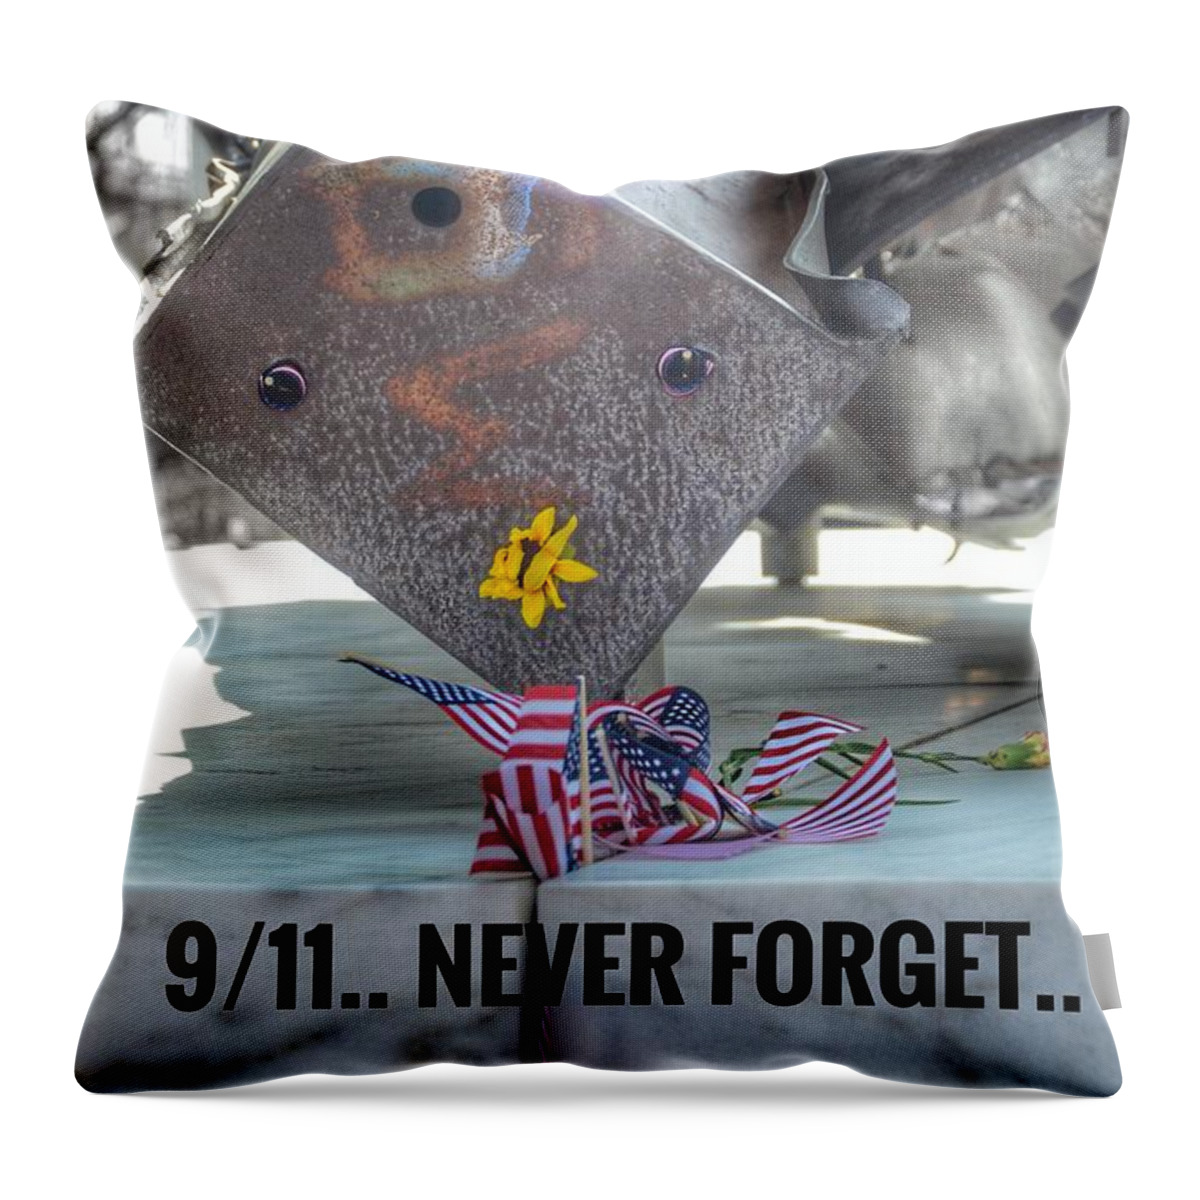 9/11 Throw Pillow featuring the photograph 9/11.. Never Forget.. by Marianna Mills